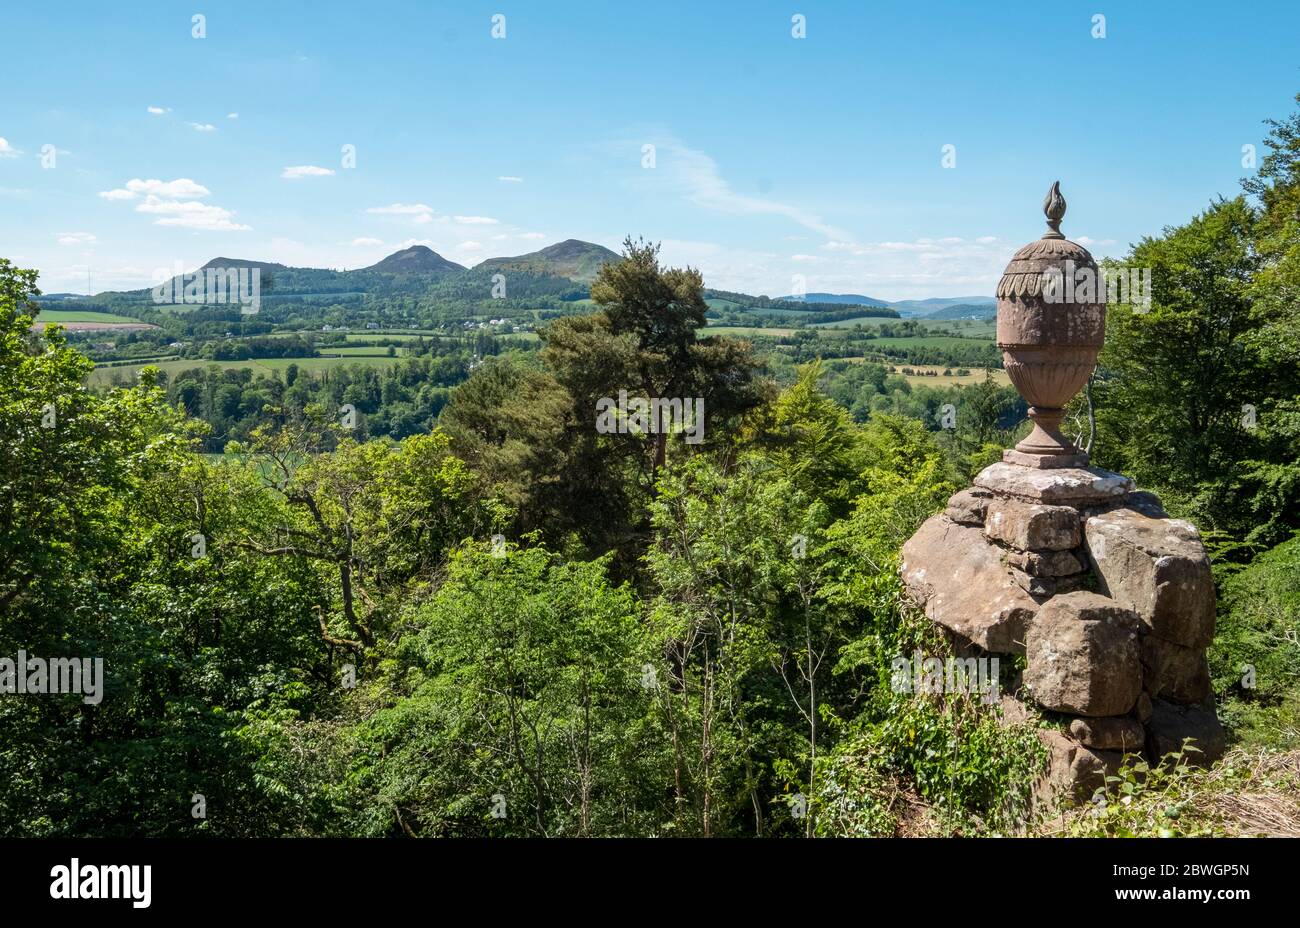 The urn in front of the William Wallace Statue at Bemersyde estate, near Melrose in the Scottish Borders is a statue commemorating William Wallace. Stock Photo